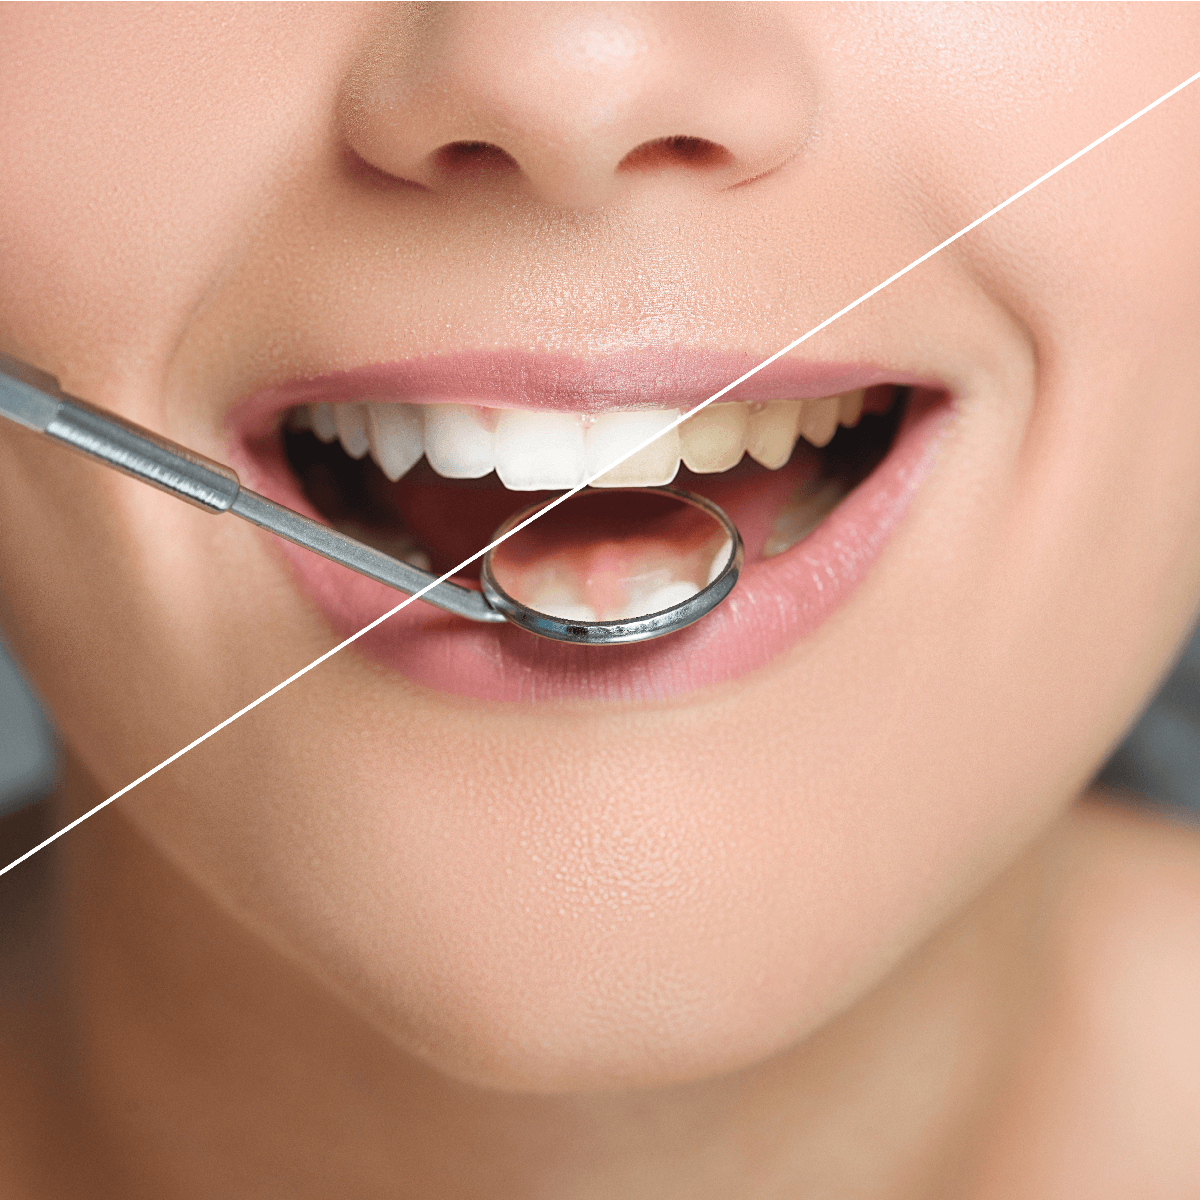 The Many Benefits of Professional Teeth Whitening